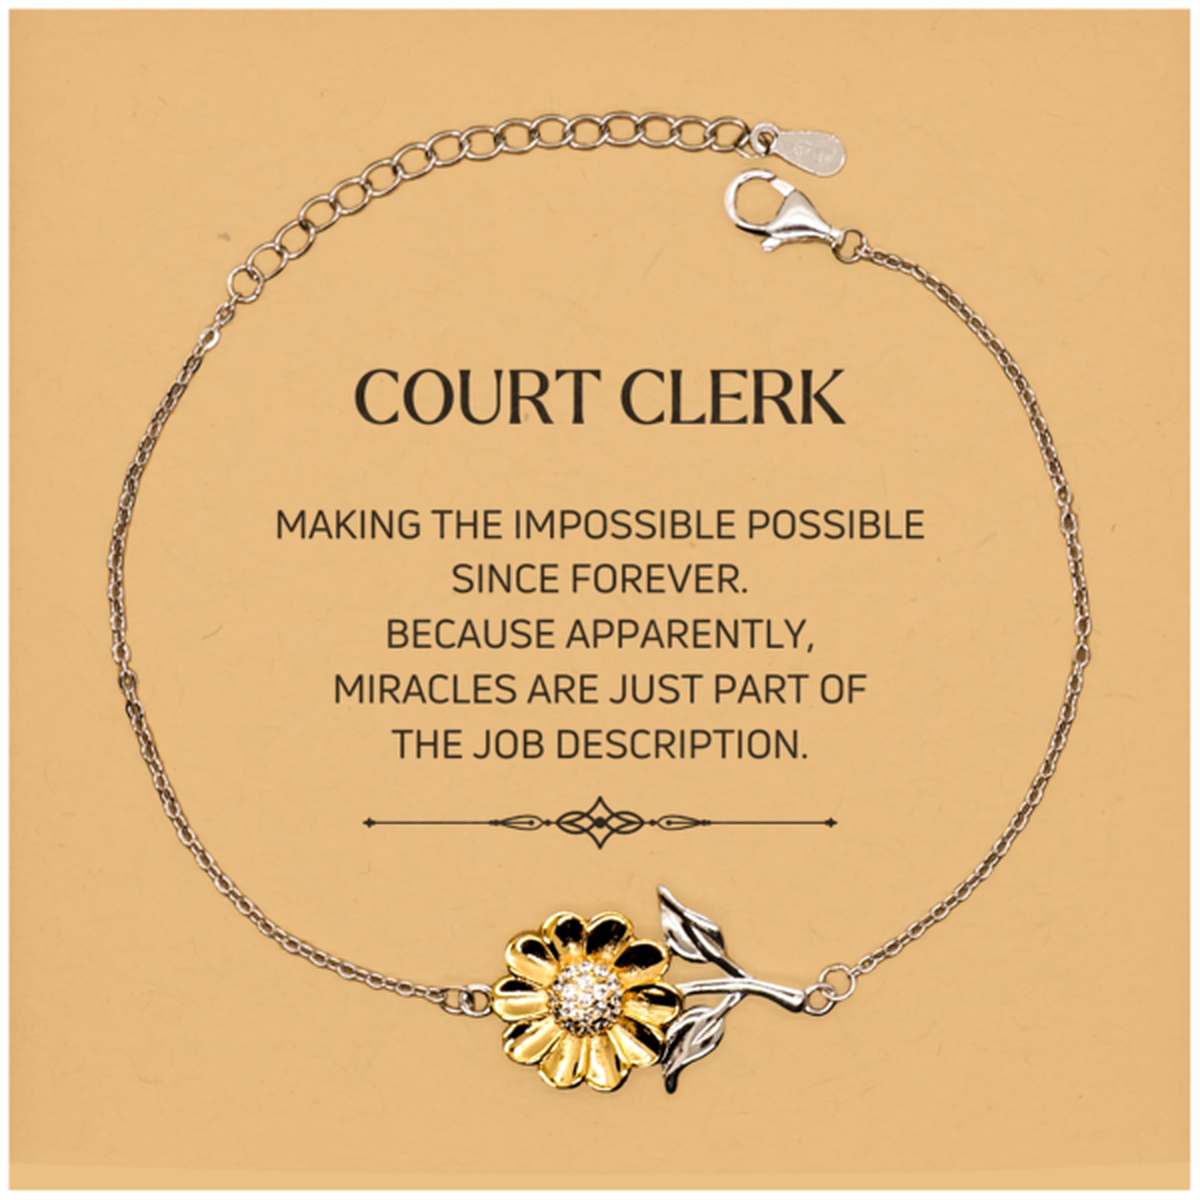 Funny Court Clerk Gifts, Miracles are just part of the job description, Inspirational Birthday Christmas Sunflower Bracelet For Court Clerk, Men, Women, Coworkers, Friends, Boss